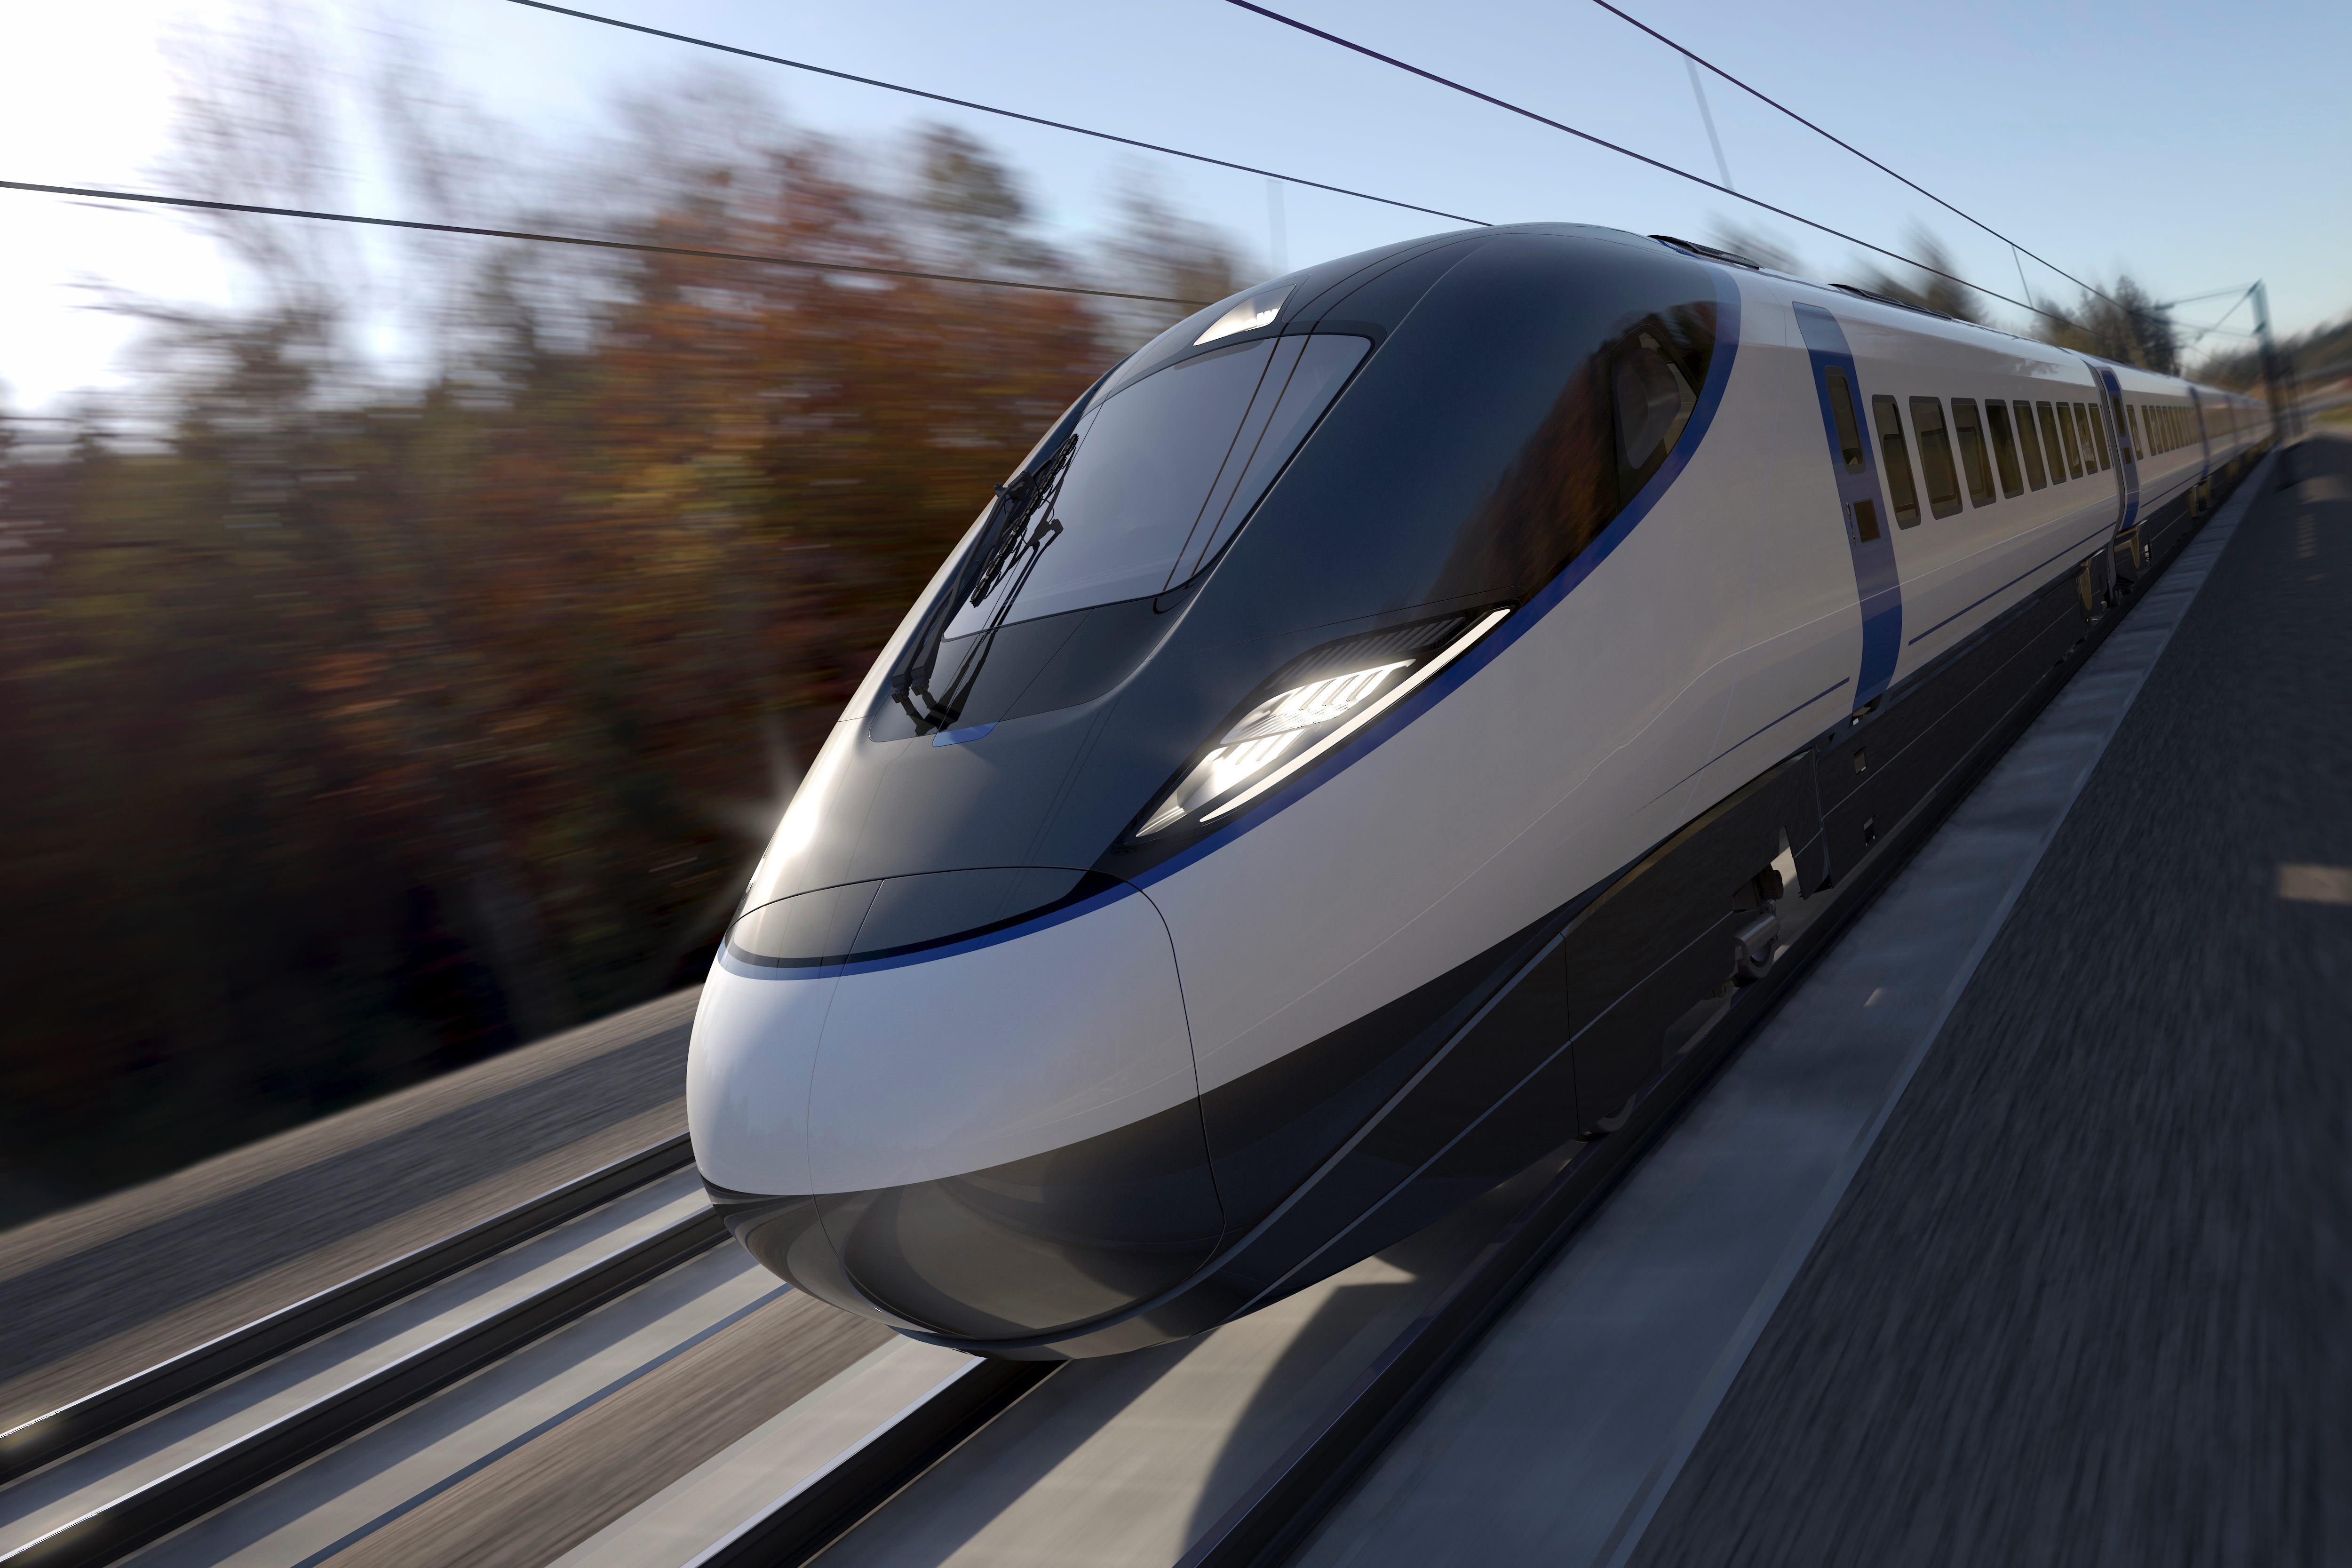 An artist’s impression of the 225mph trains promised as part of the HS2 plan